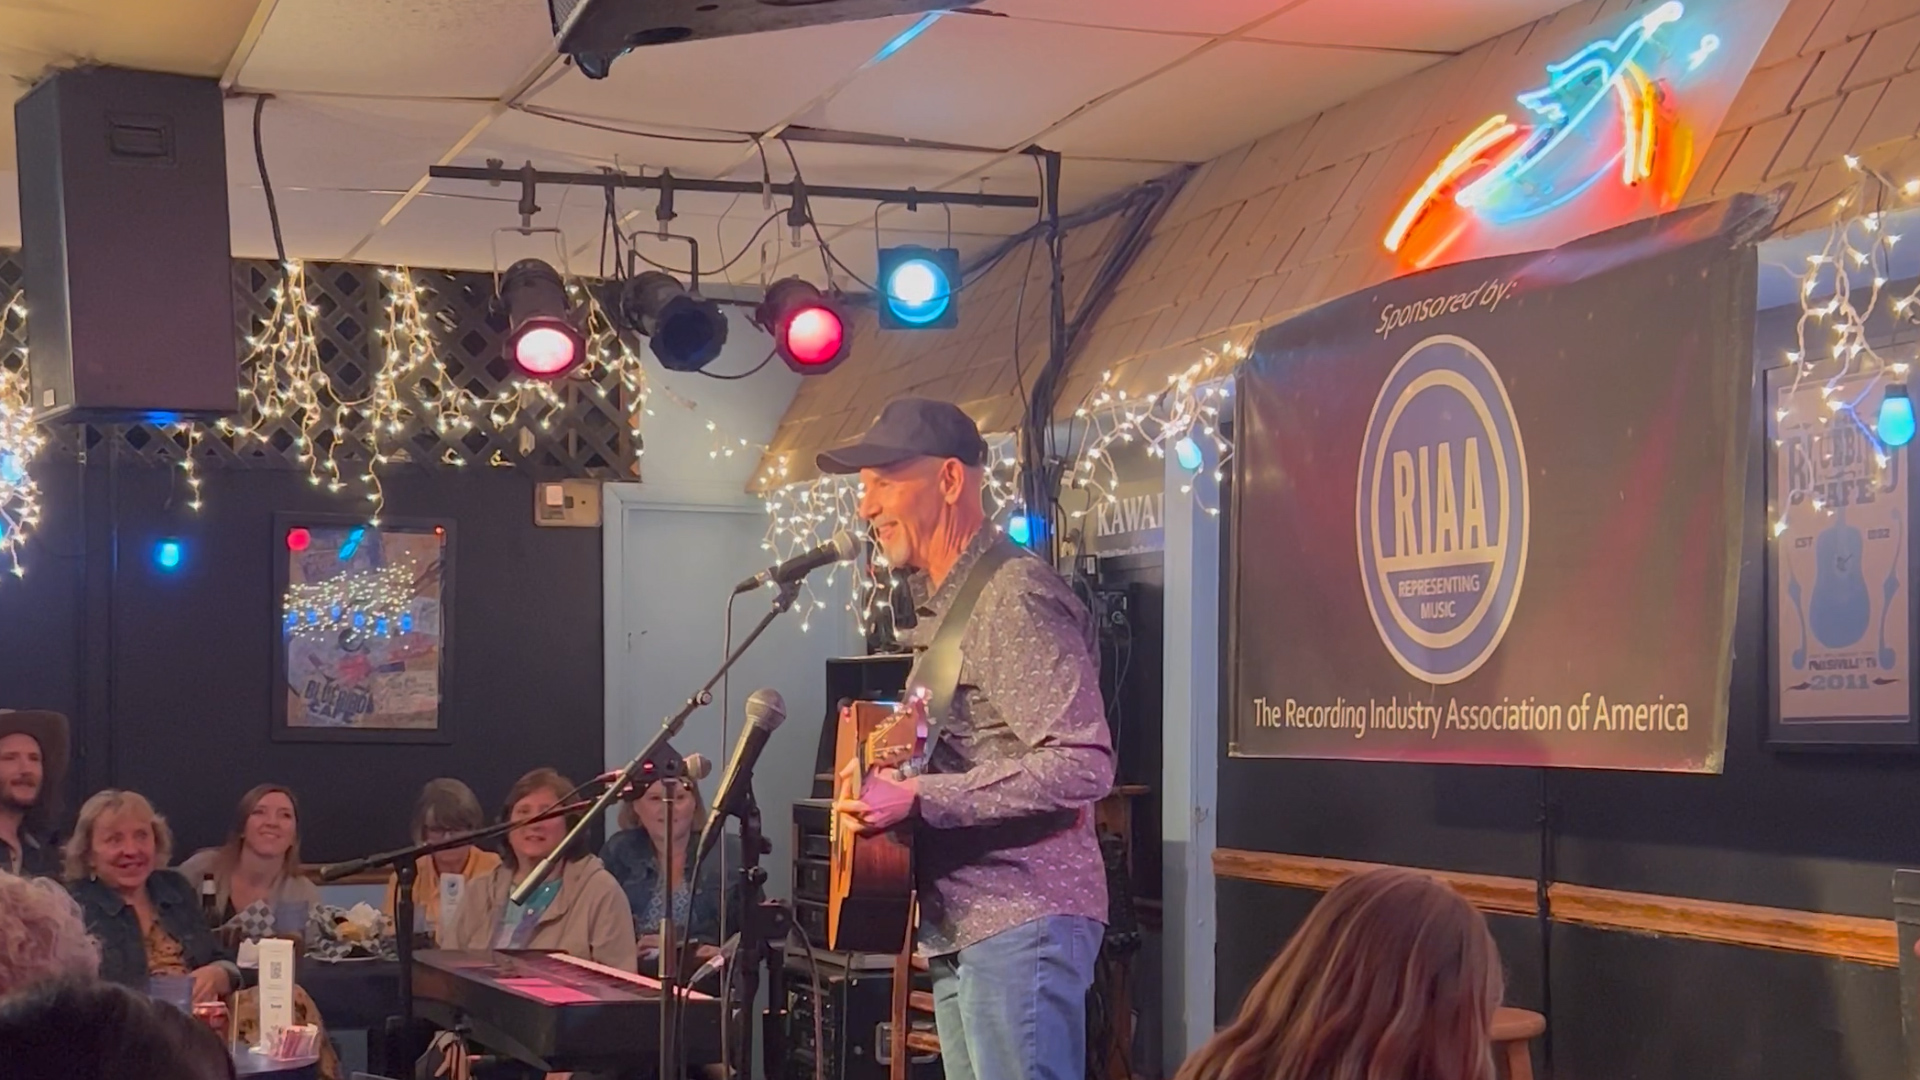 At the Bluebird Cafe